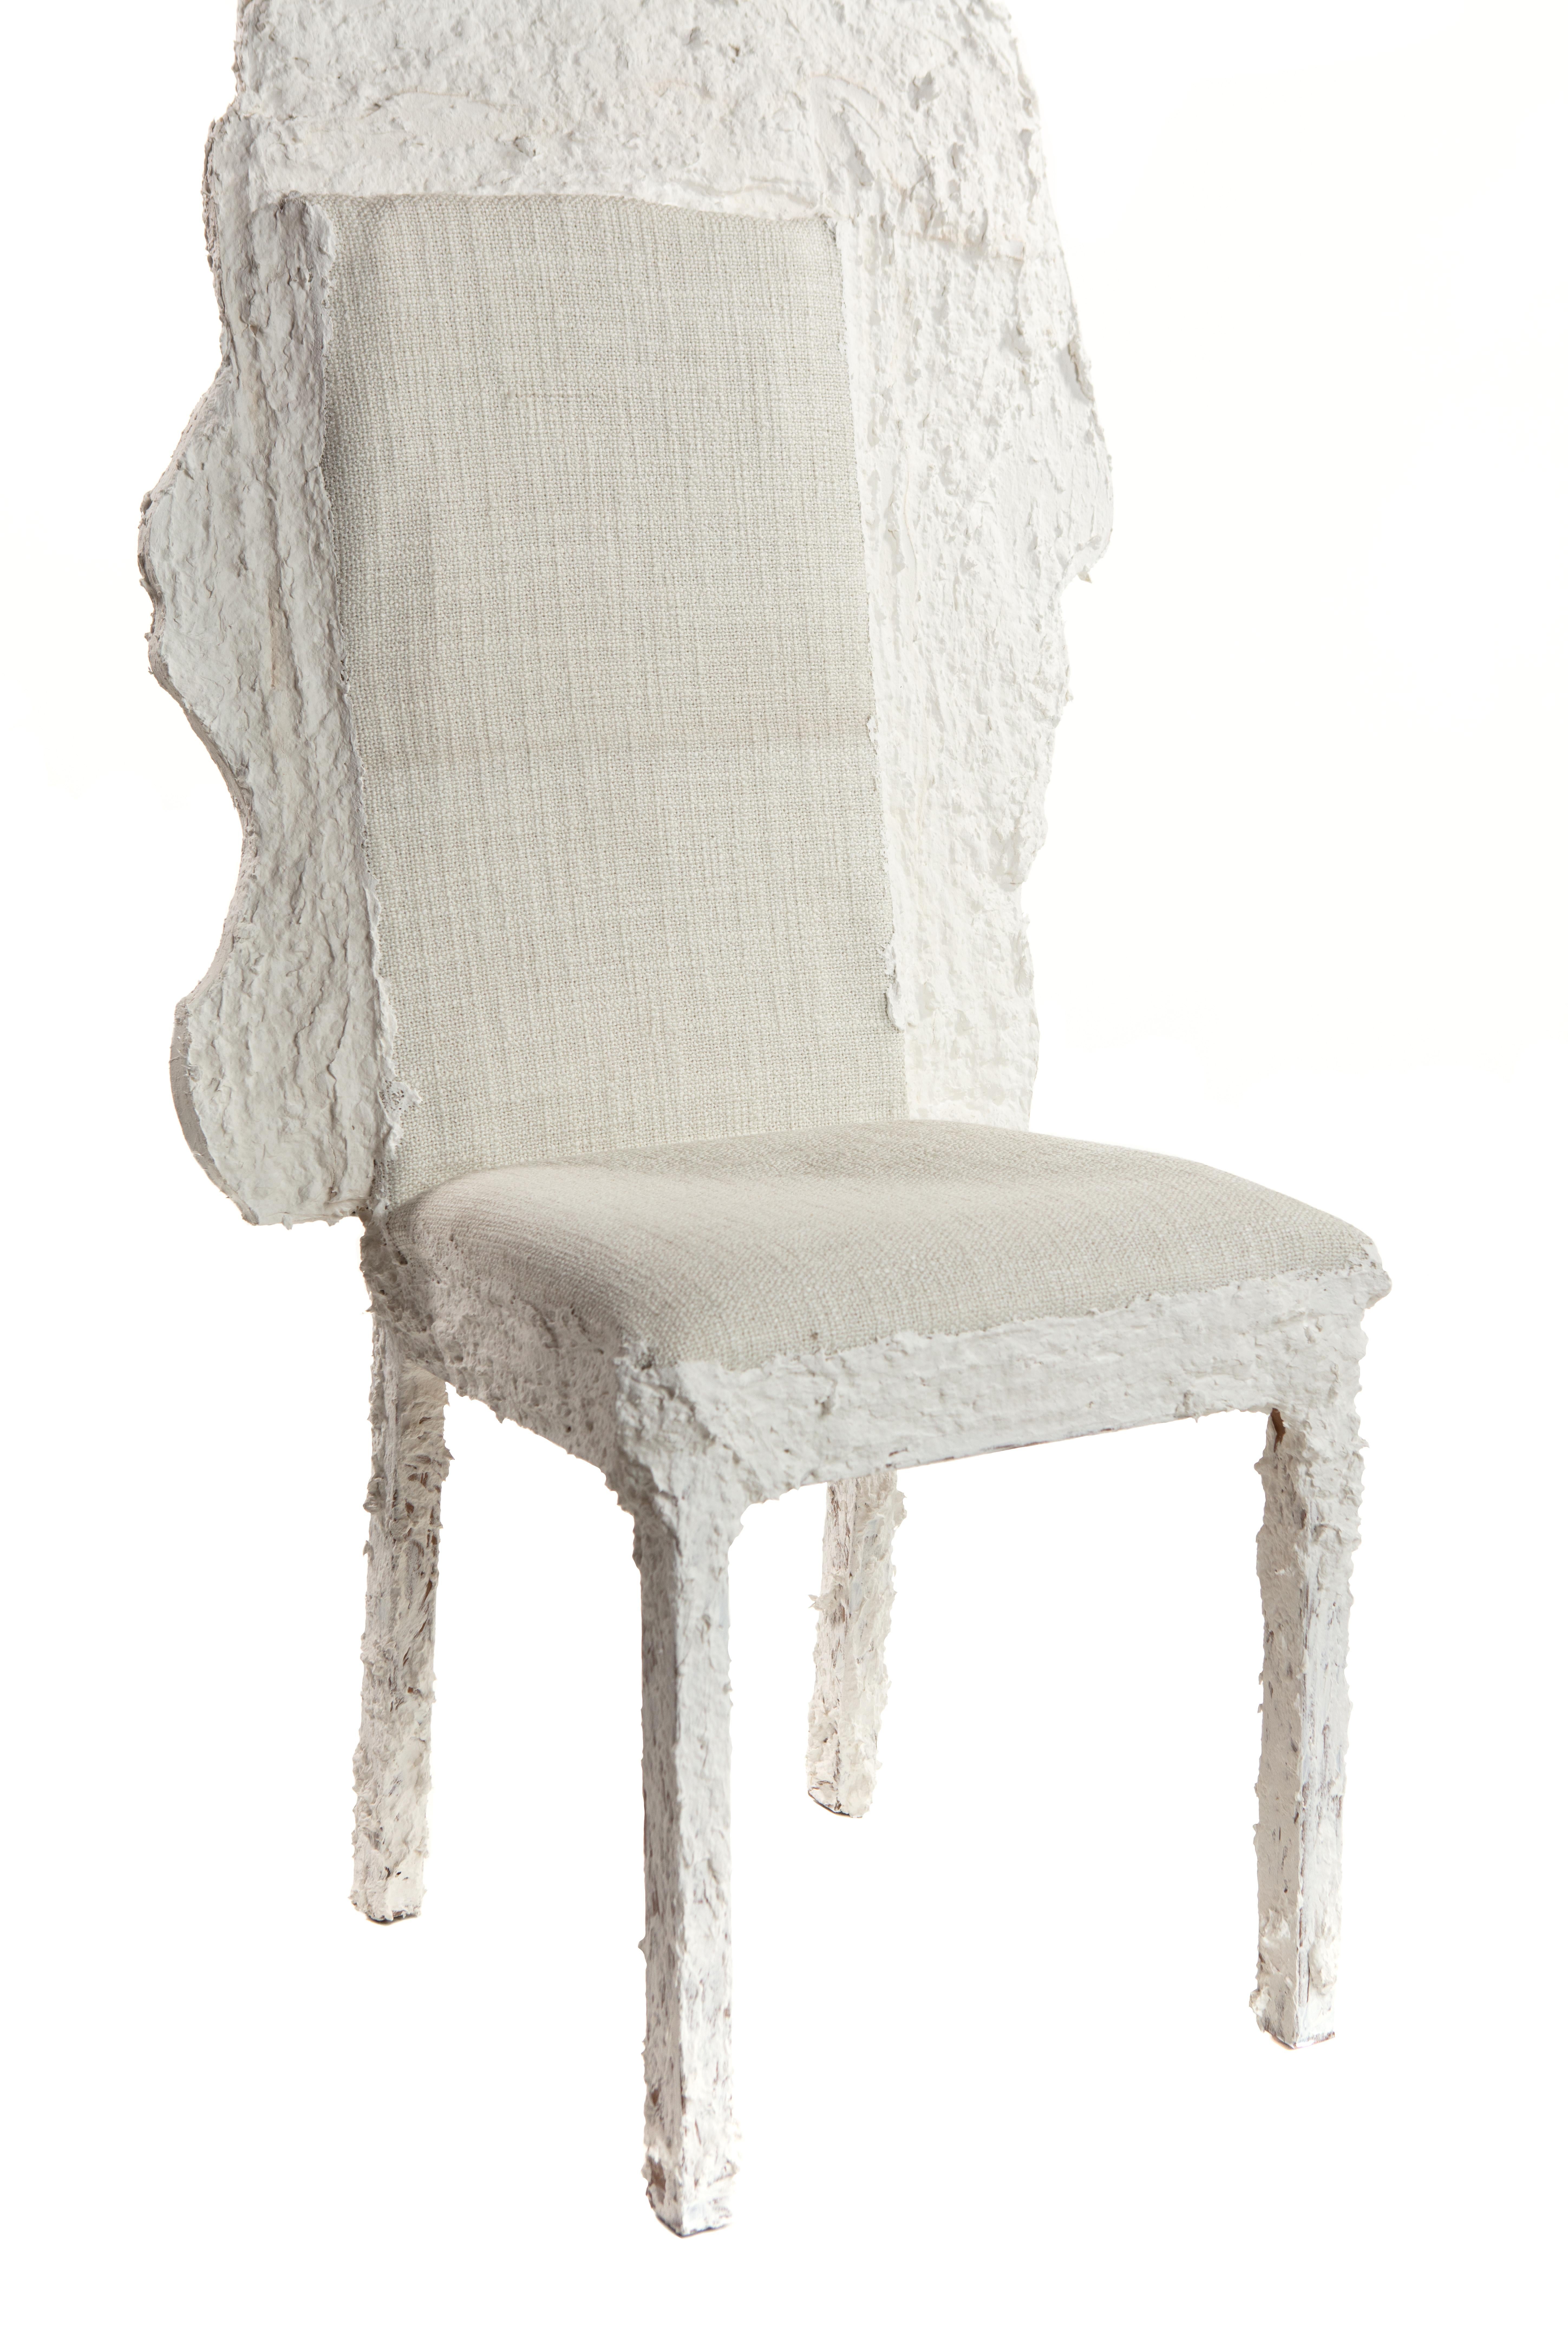 Hand-Crafted White Plaster Sculptural Chair, 21st Century by Mattia Biagi For Sale